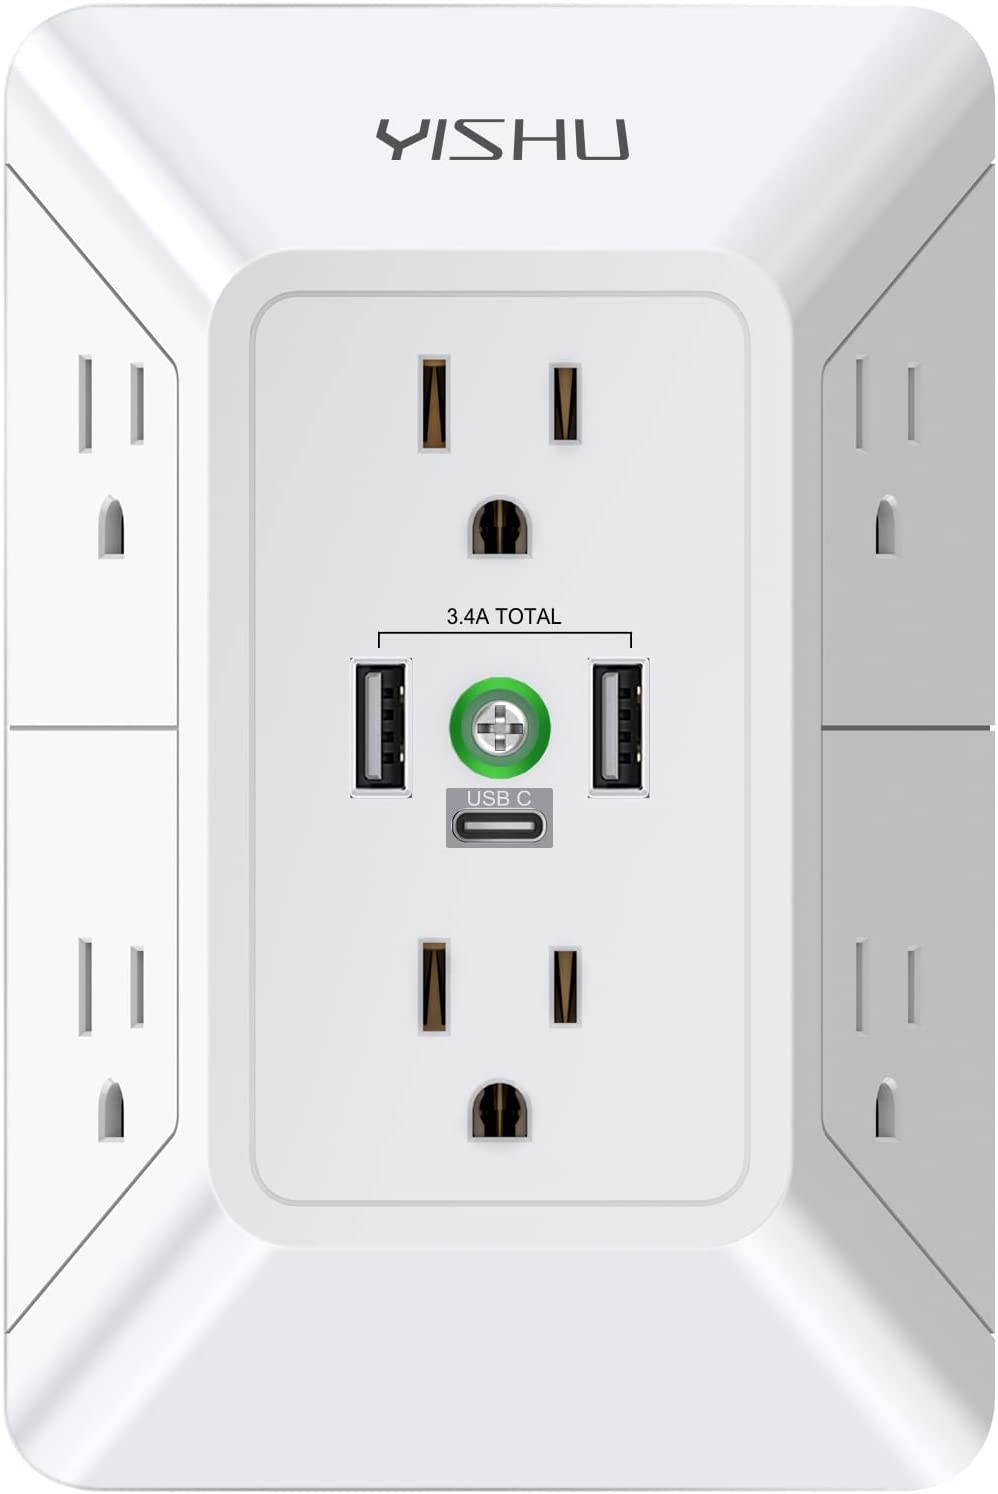 Multi Plug Outlet Surge Protector – YISHU 3 Sided Power Strip with 6 AC Outlet Extender and 3 USB Ports (1 USB C), Adapter Spaced Outlet Splitter, ETL Listed, White